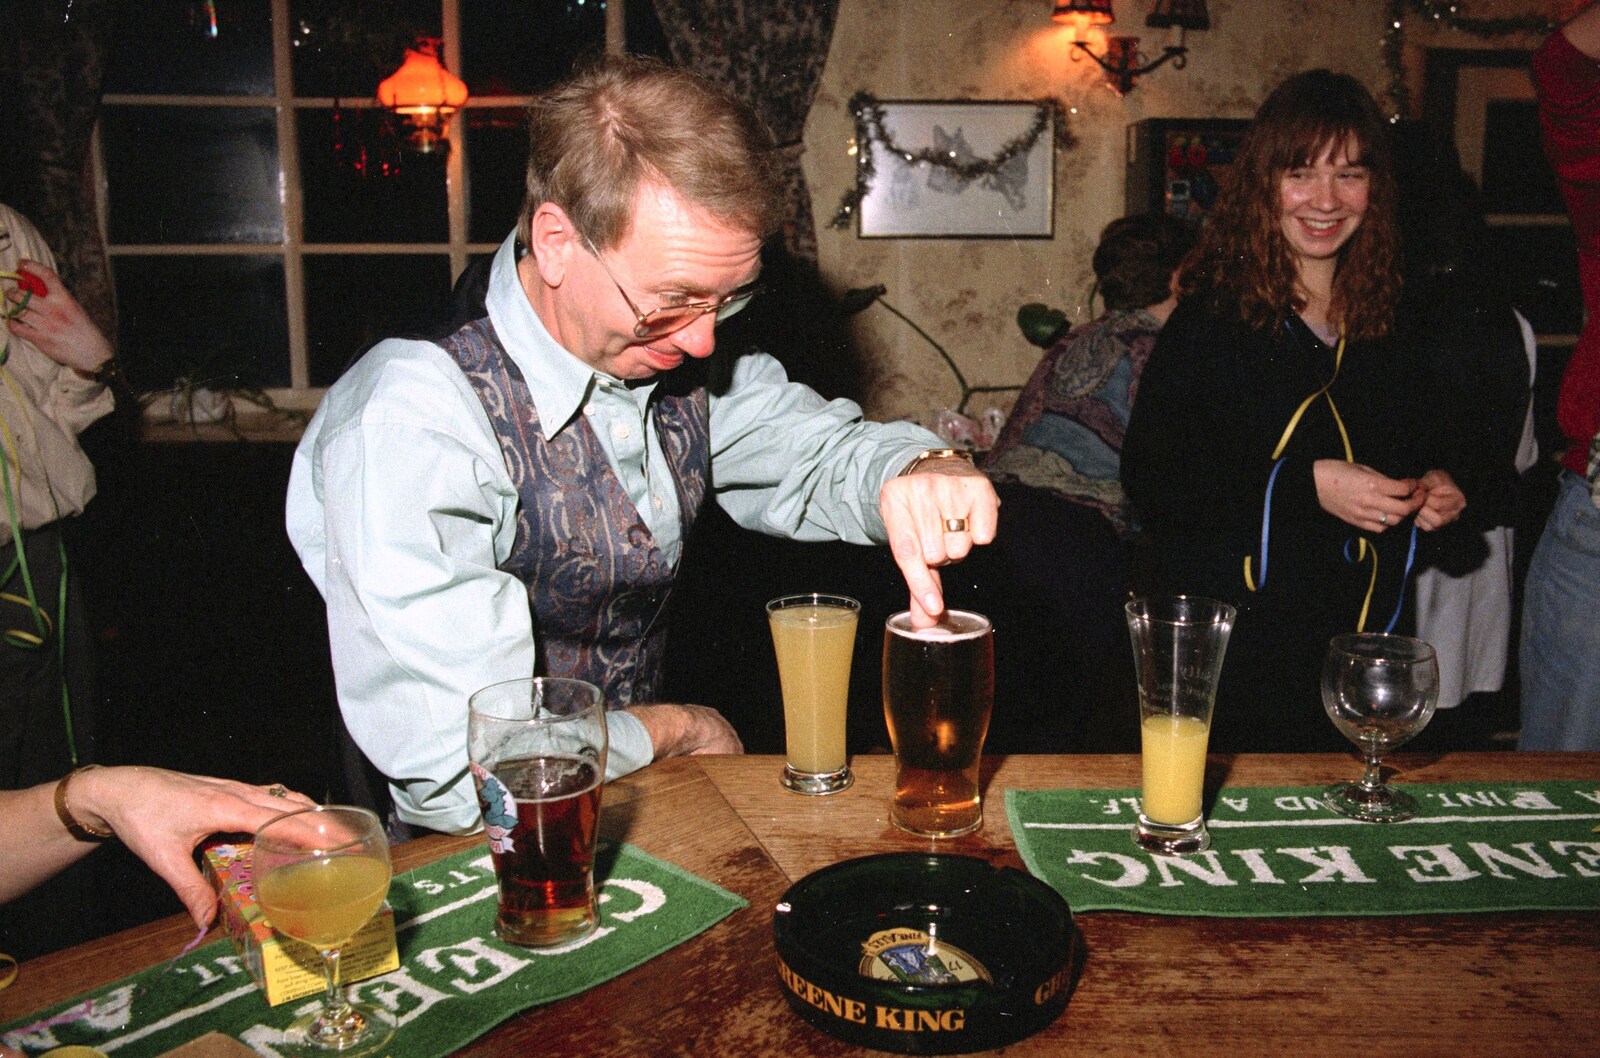 John Willy picks a paper disc out of his beer from New Year's Eve at the Swan Inn, Brome, Suffolk - 31st December 1994